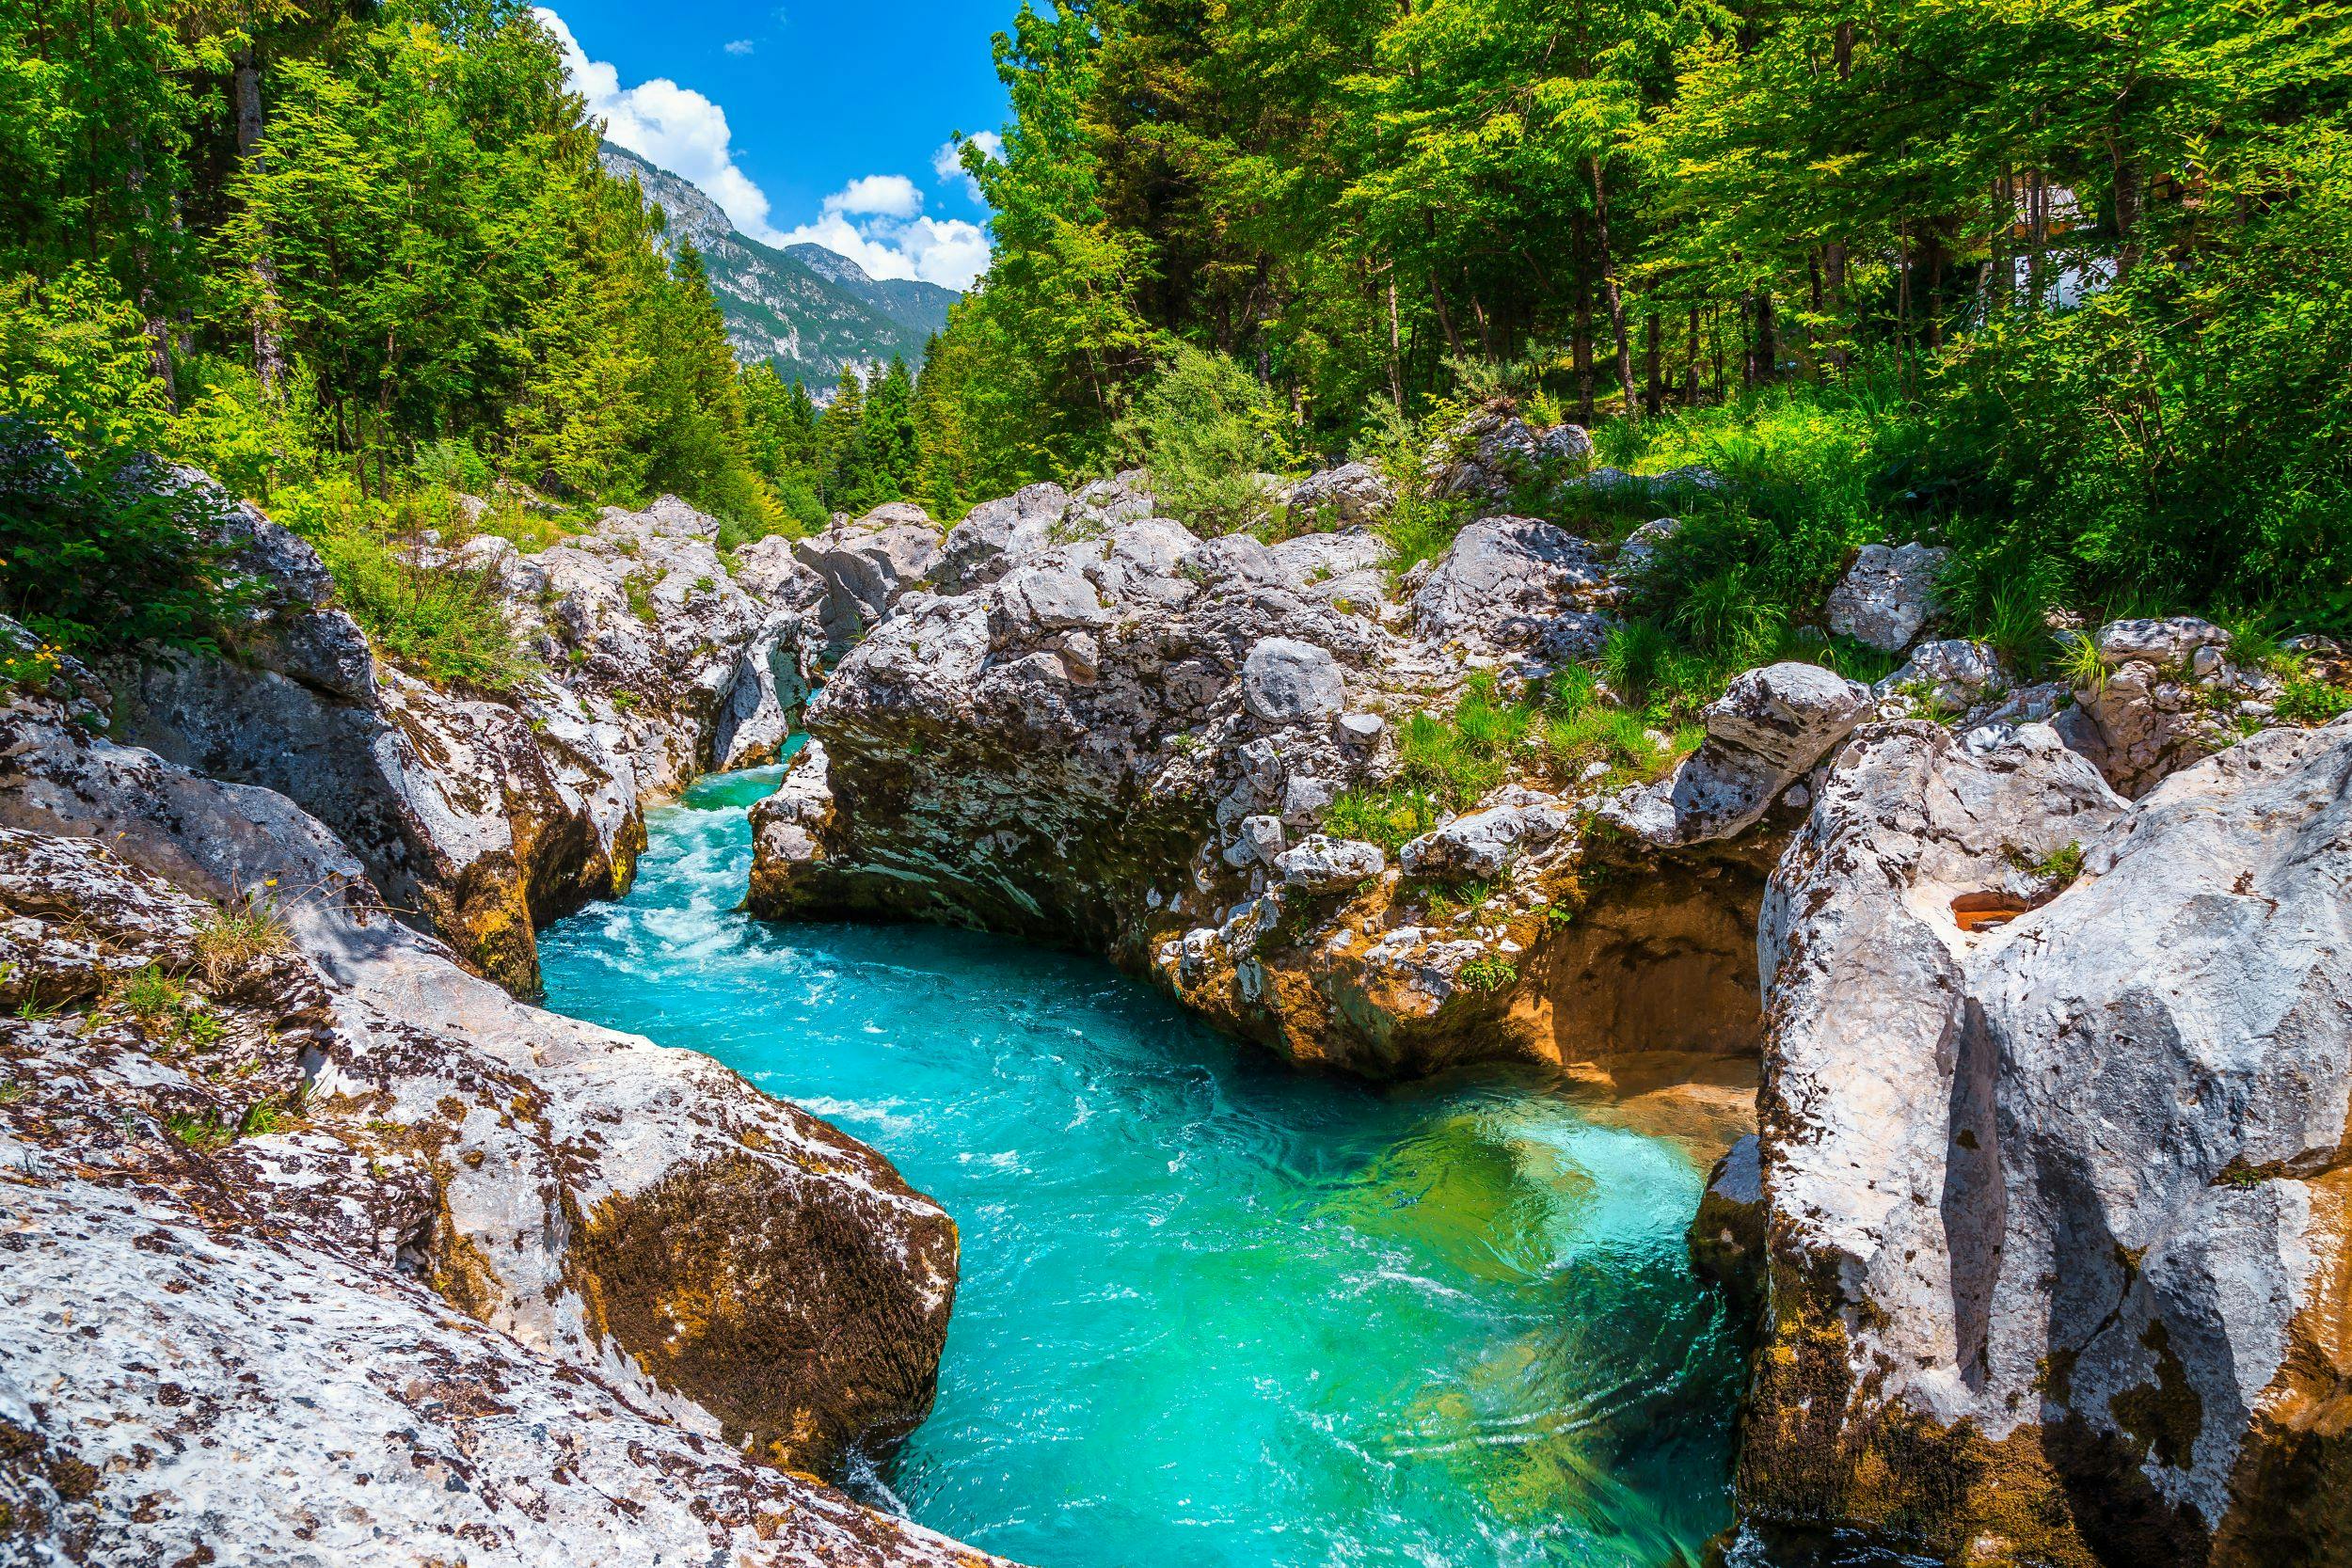 Full-day Rafting experience on the Soča River from Ljubljana